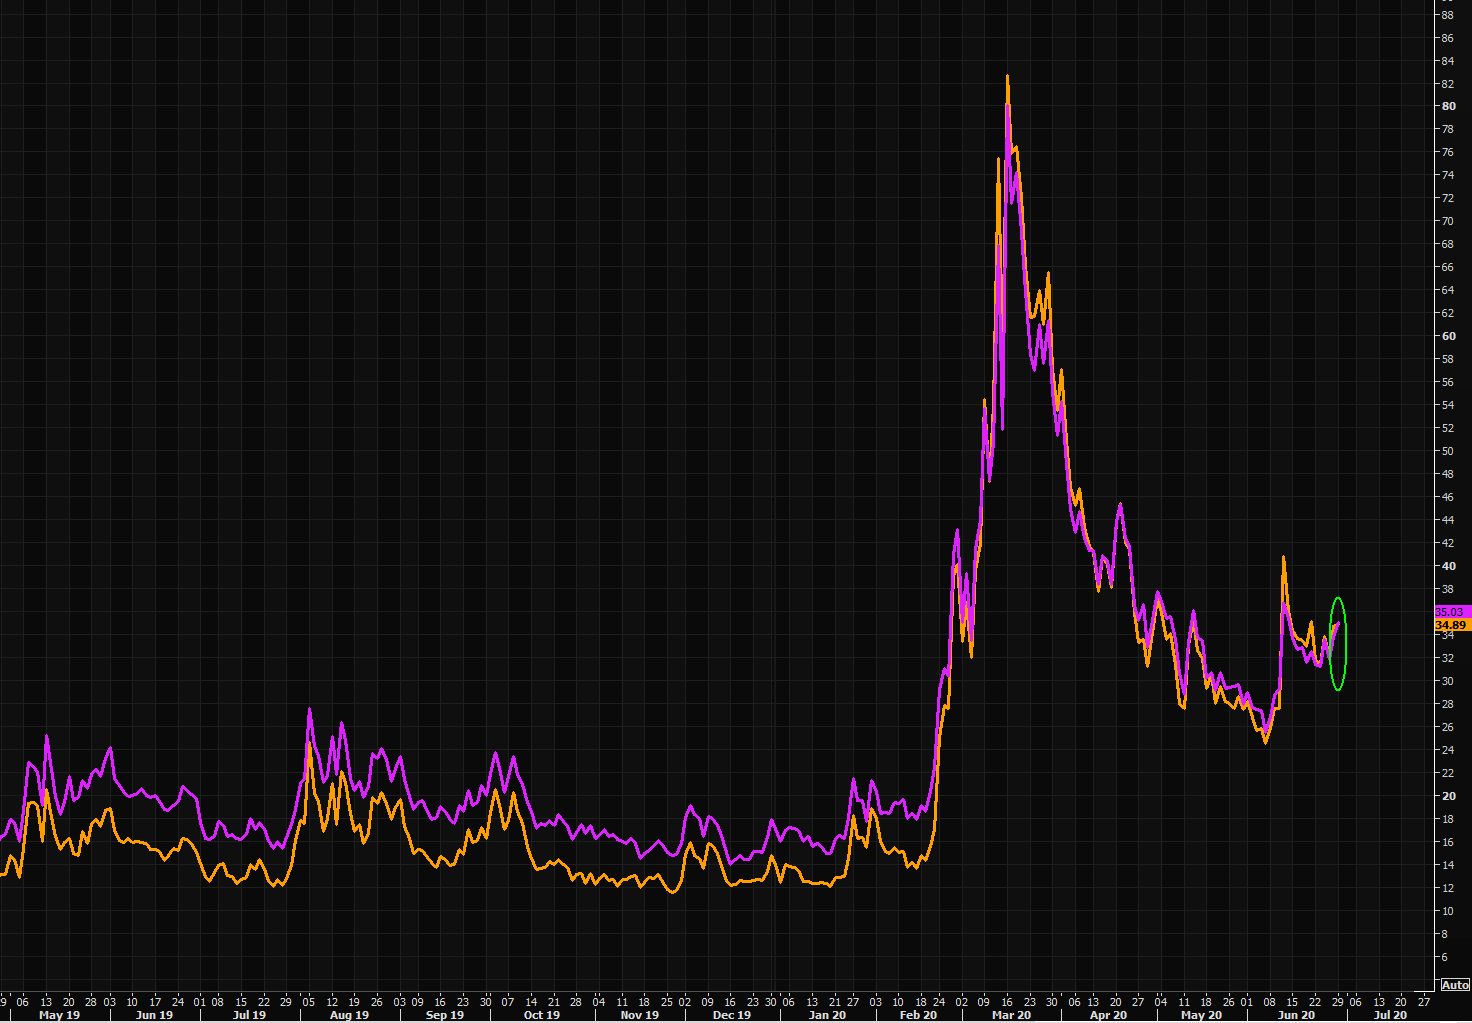 at least one thing going back to normal - NASDAQ "VIX", VXN, above VIX